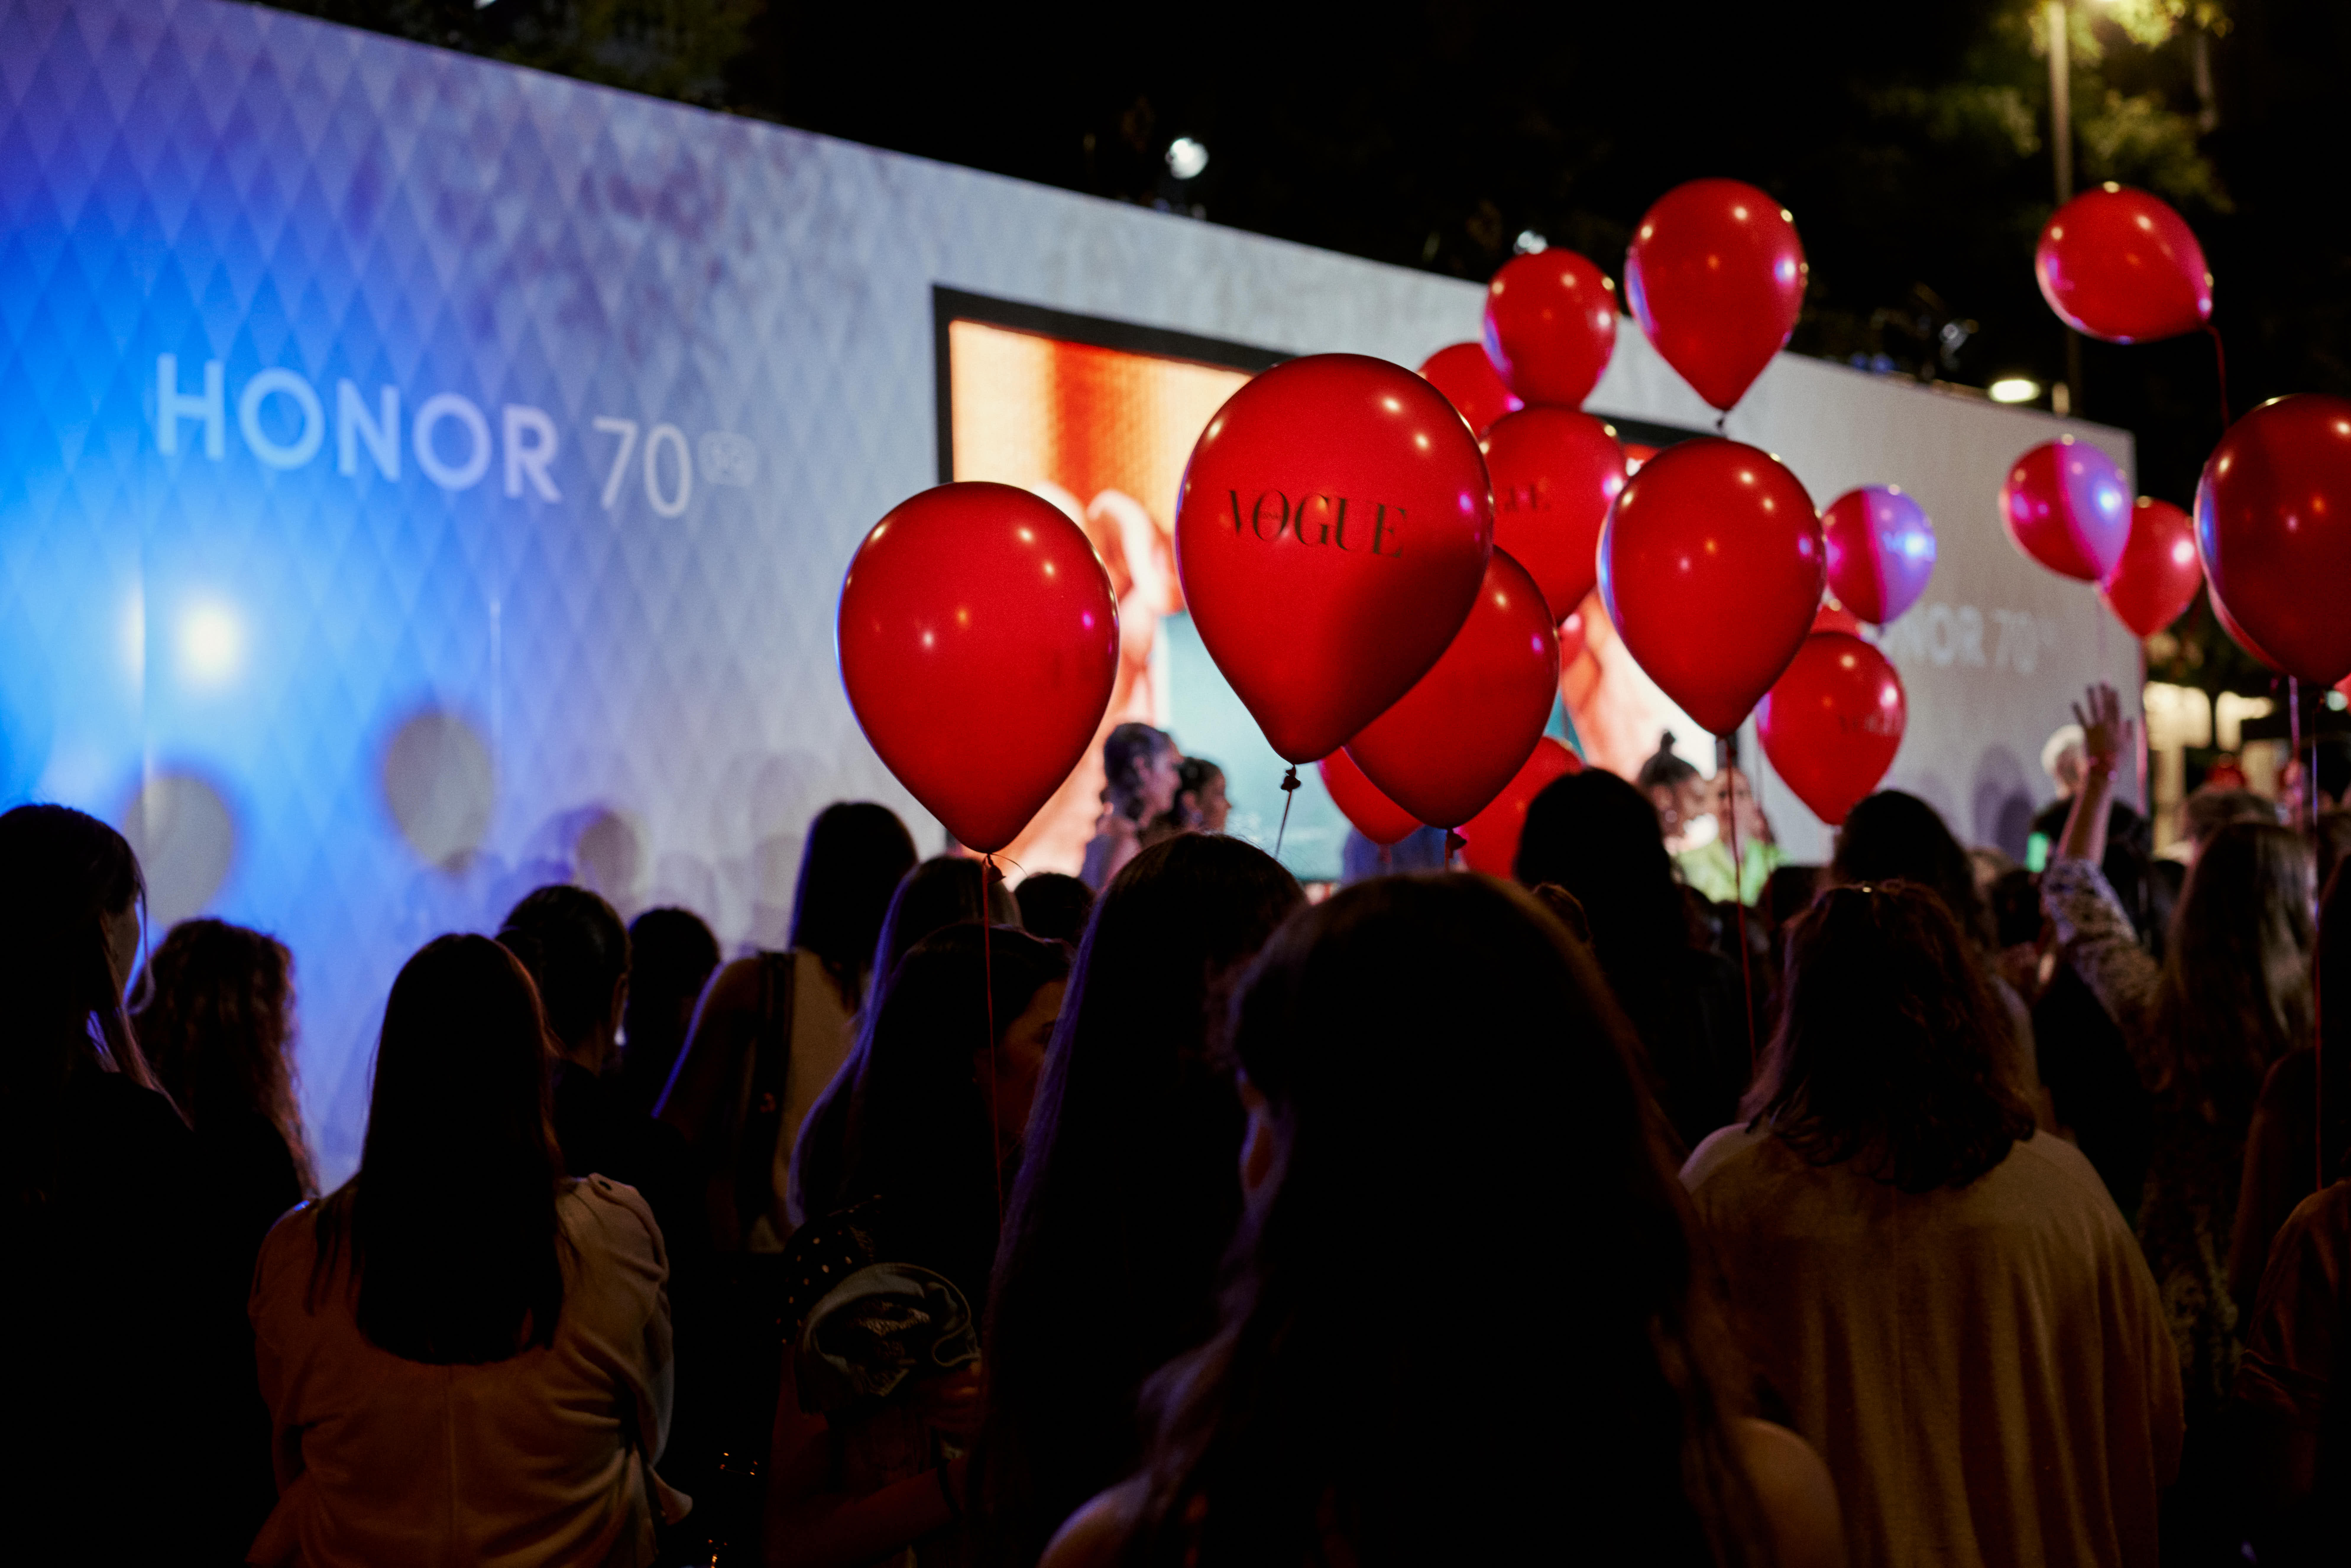 HONOR Joins the Vogue Fashion Night Out 2022 in Spain